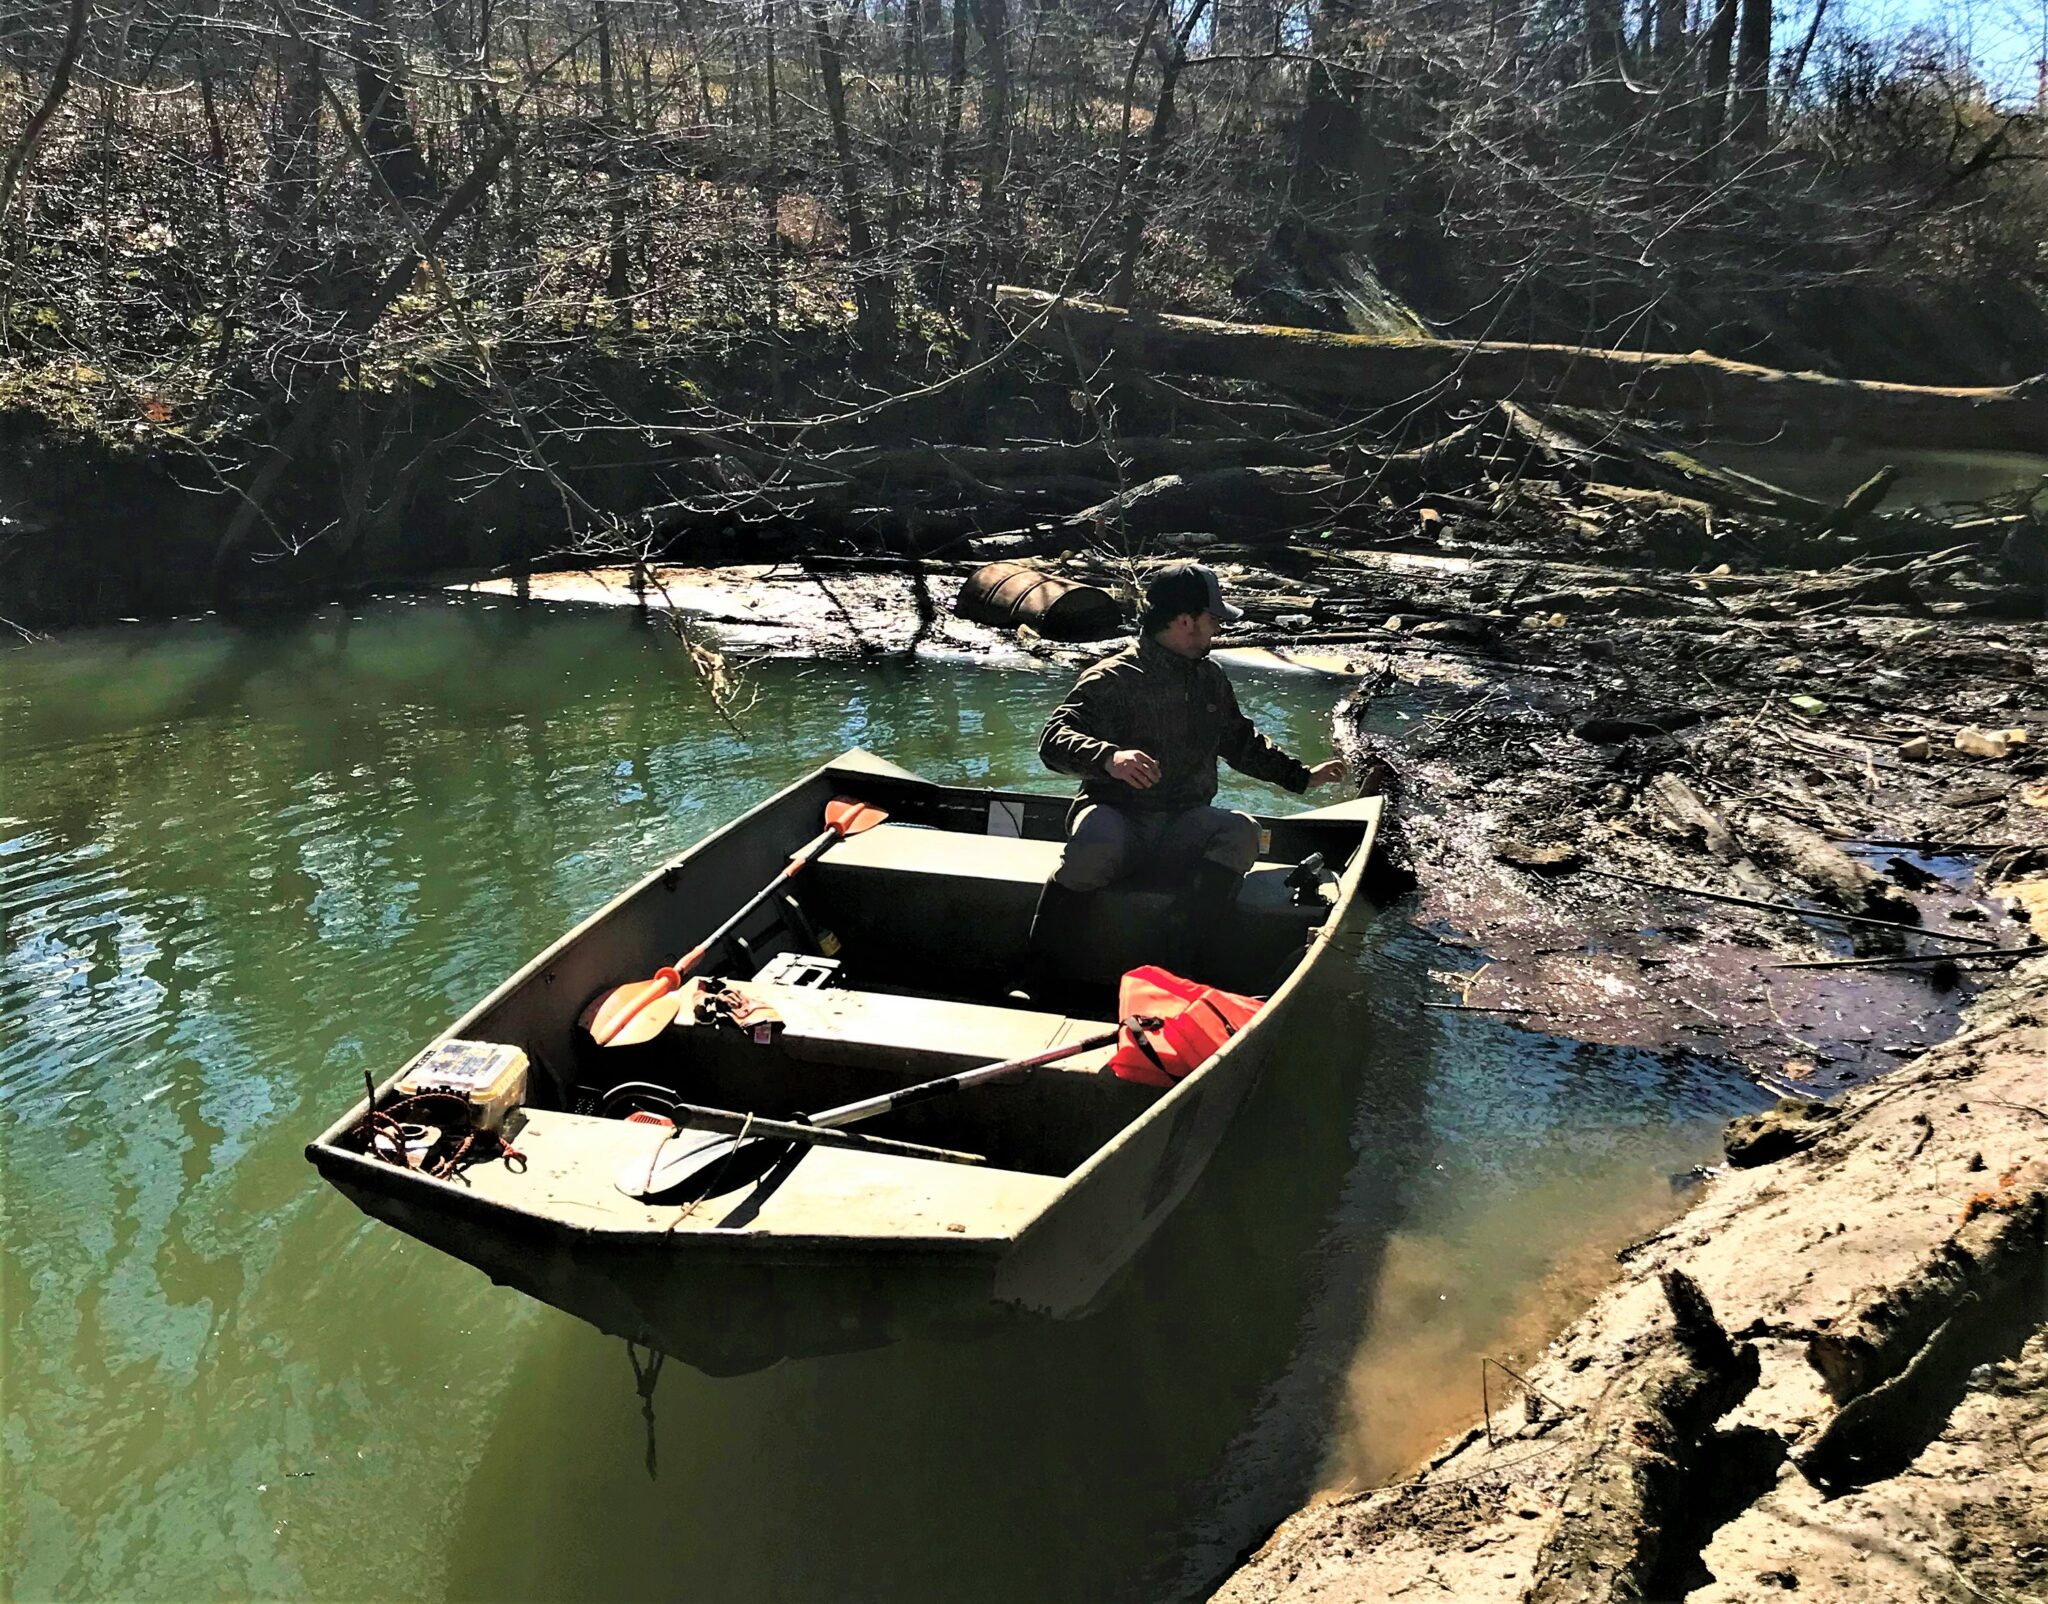 Gearing up for the Knox County Water Trail